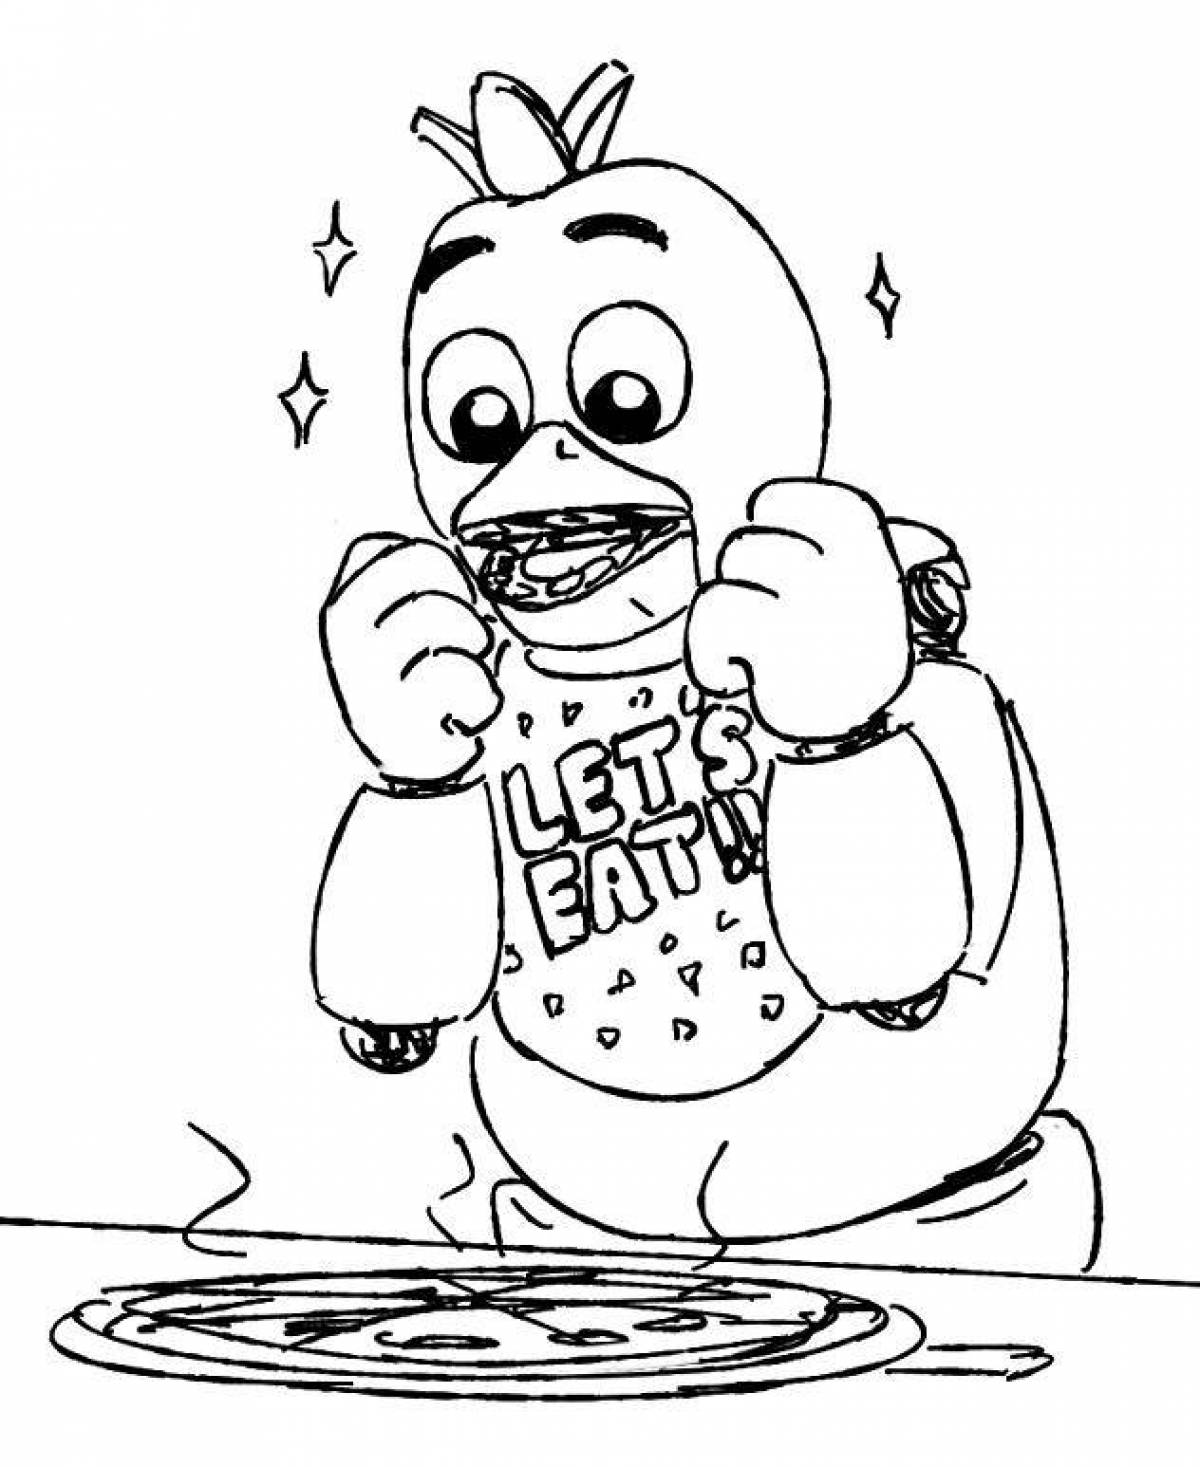 Chica's animatronic coloring book